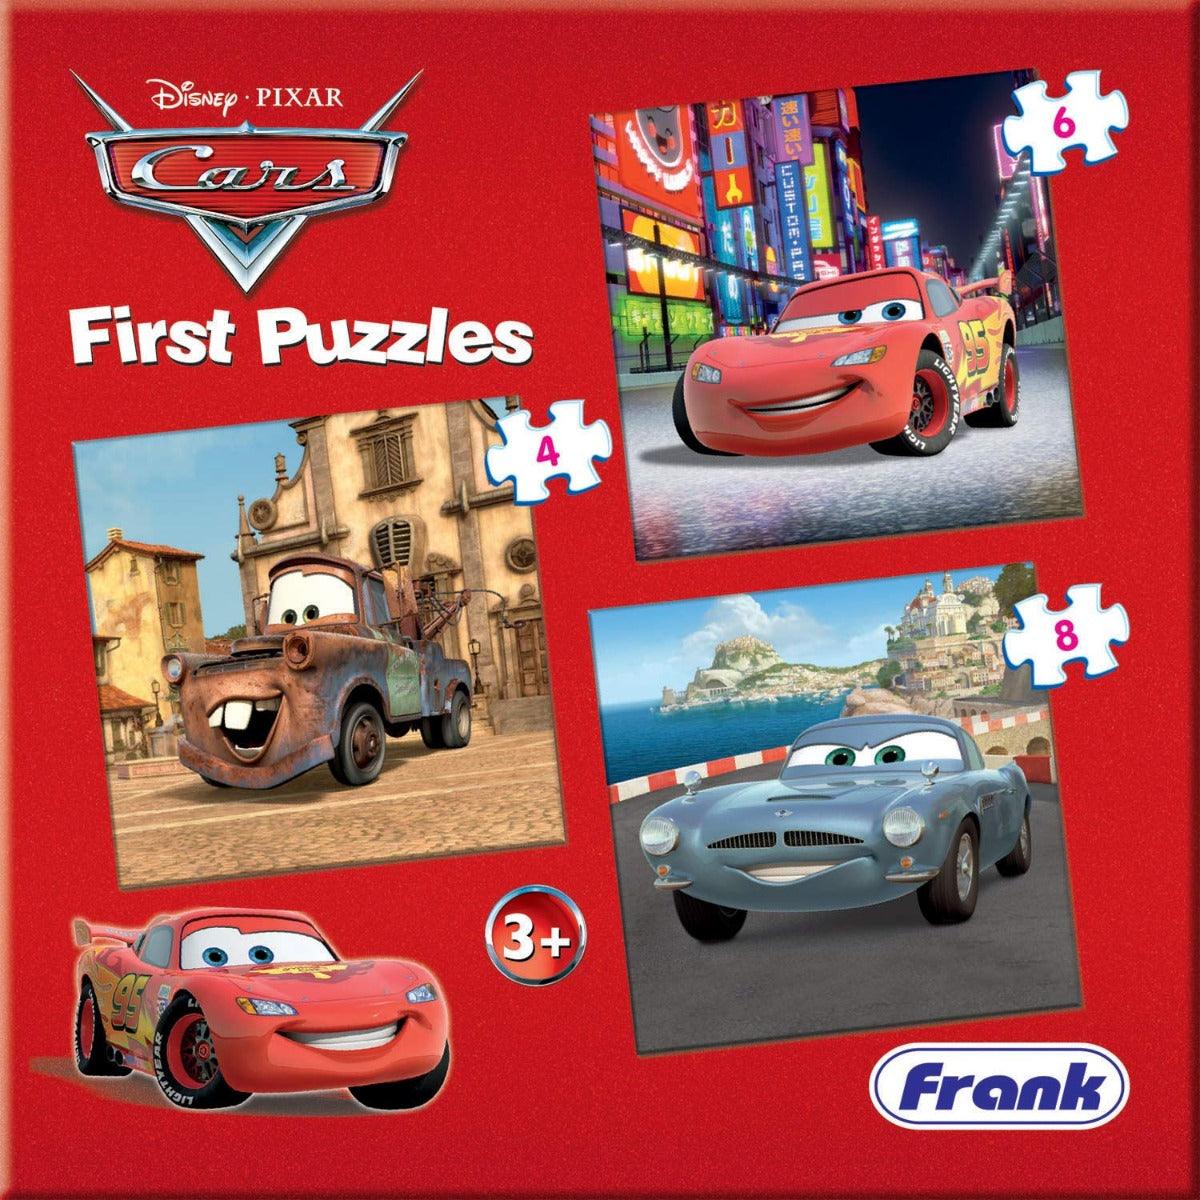 Frank Disney Pixar Cars 3 Puzzles in 1 - A Set of 3 48 Pc Jigsaw Puzzles for 5 Year Old Kids and Above